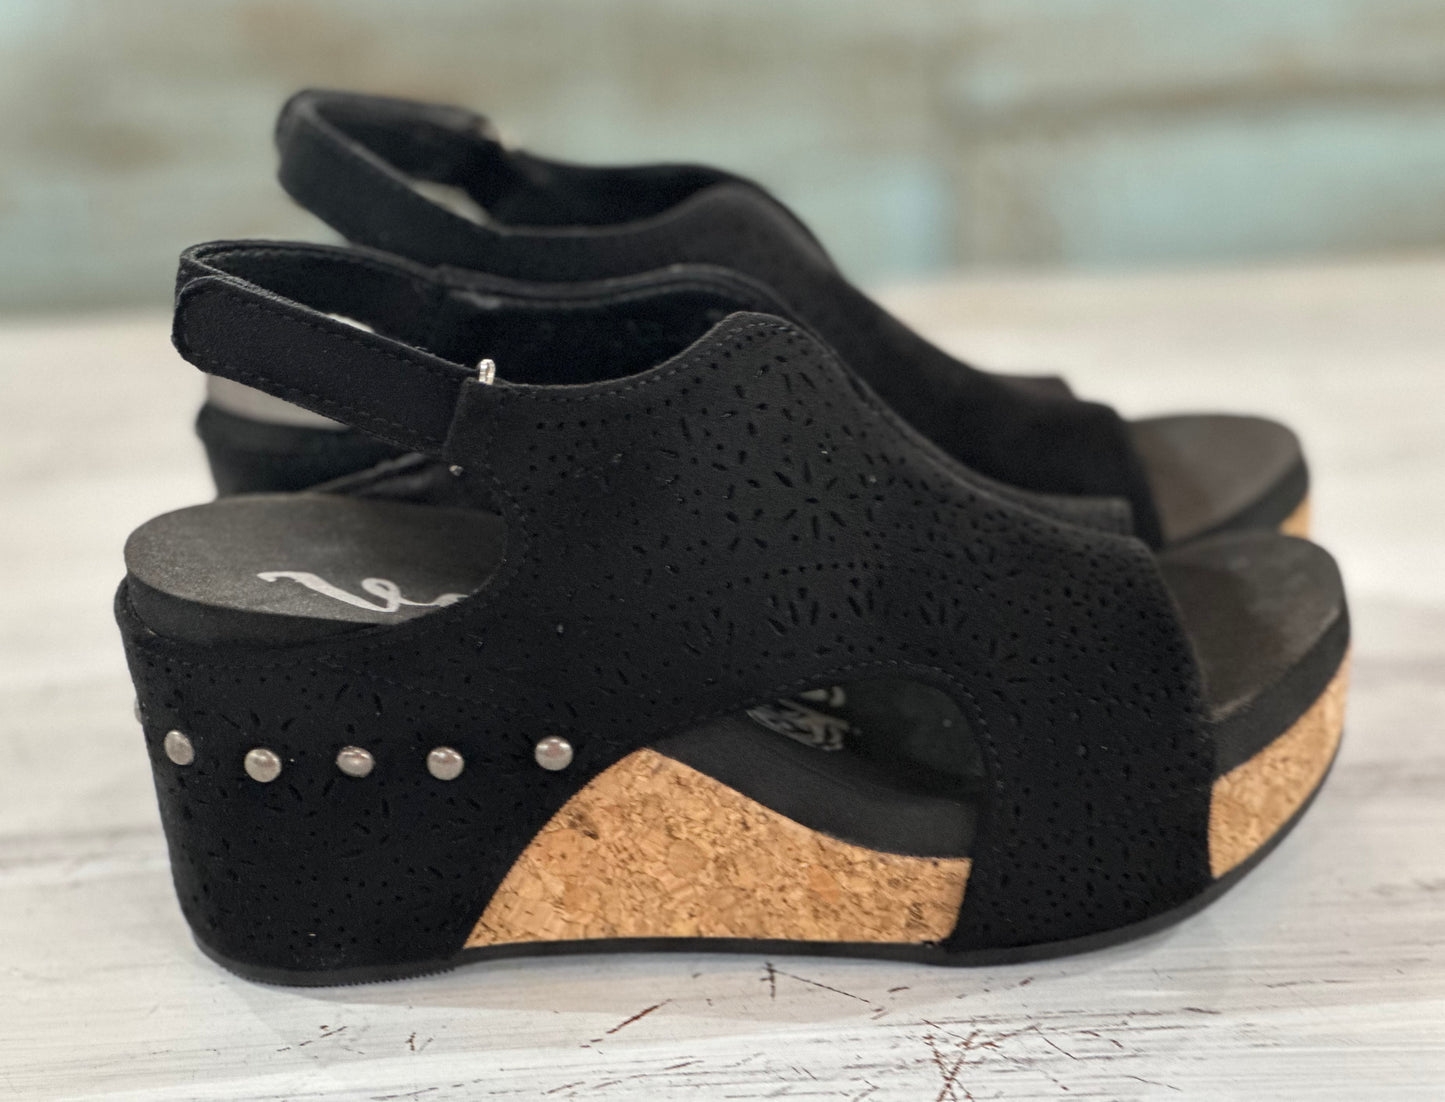 Very G black “Free Fly” wedges